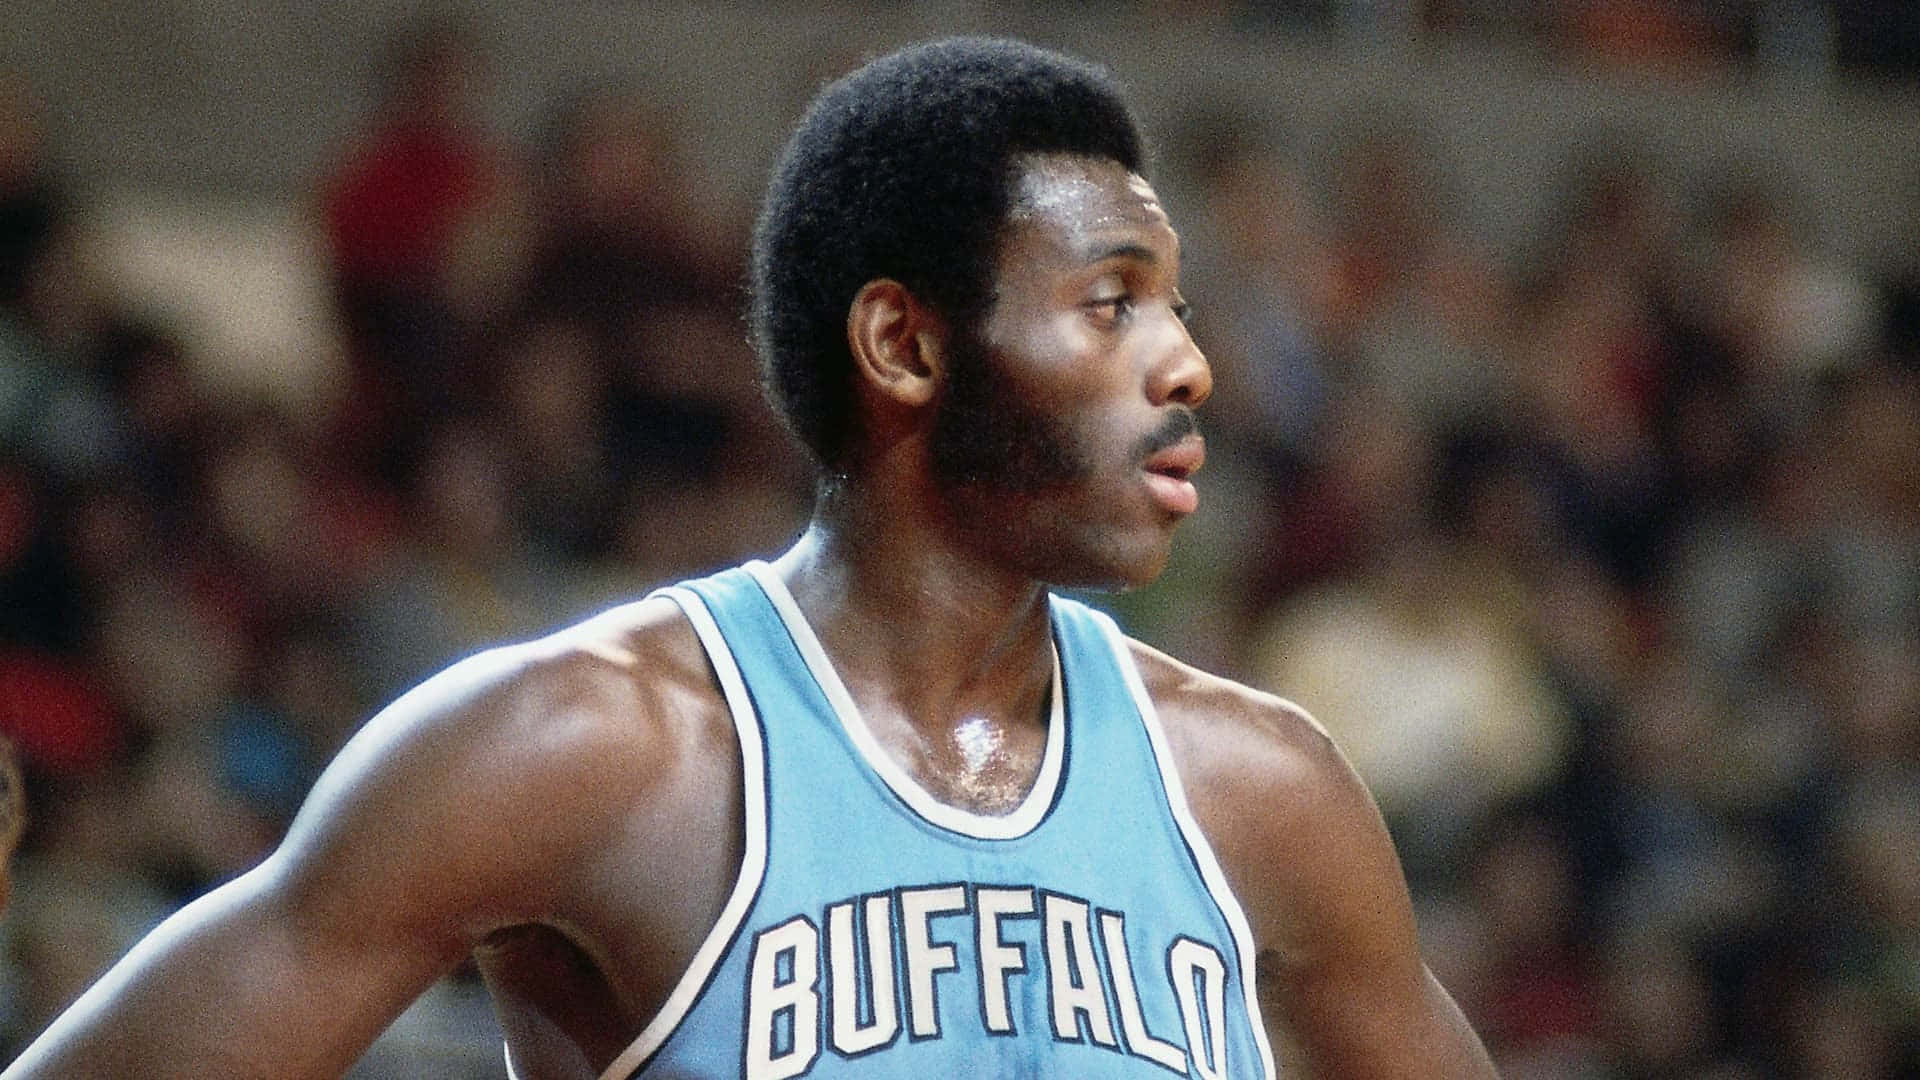 Greensboro legend Bob McAdoo reflects on protests then and now and the  NBA's leading role